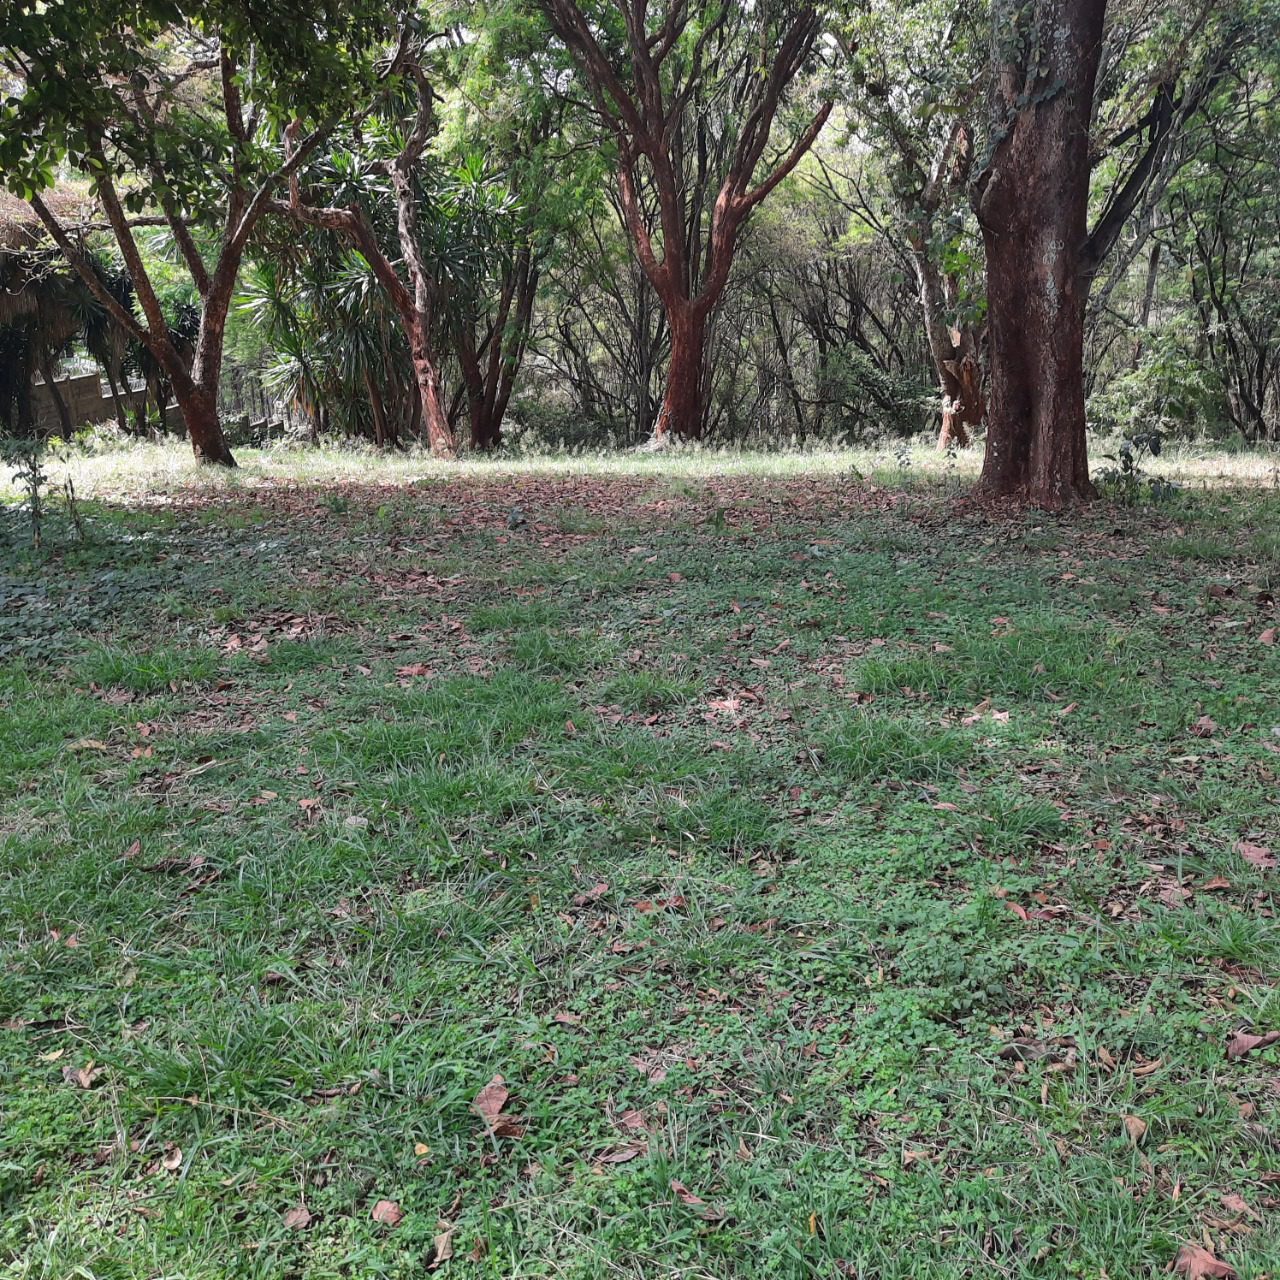 5 Acres Land For Sale near farasi lane opposite peponi schools. Each acre is 100m negotiable. Musilli Homes